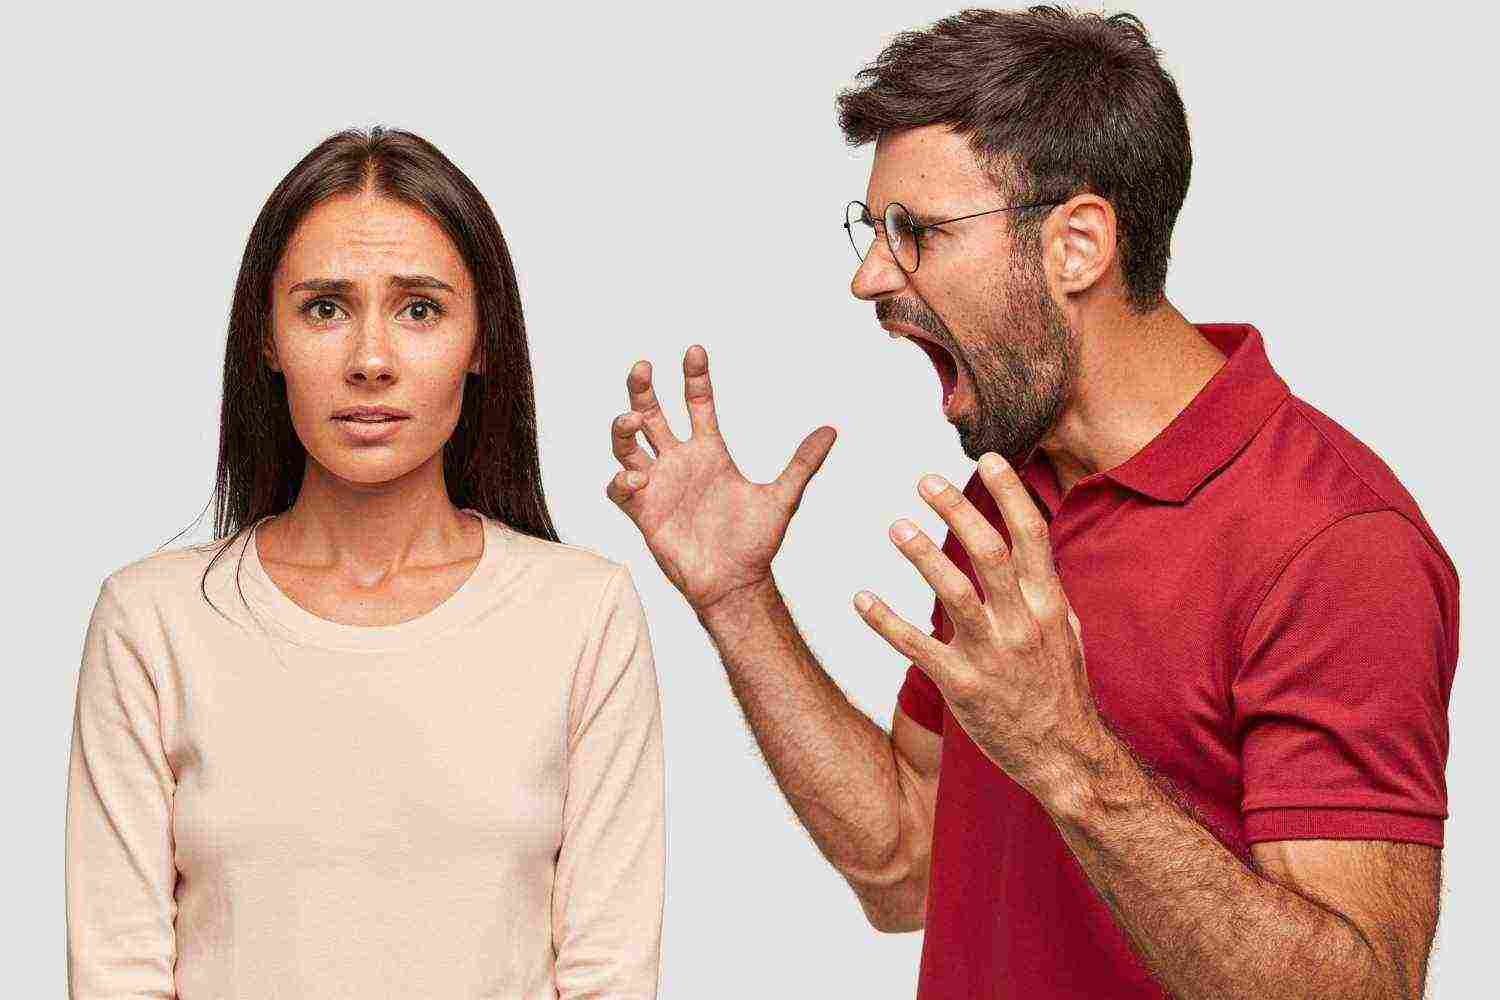 furious bearded guy screams gestures angrily yells woman have dispute pose together